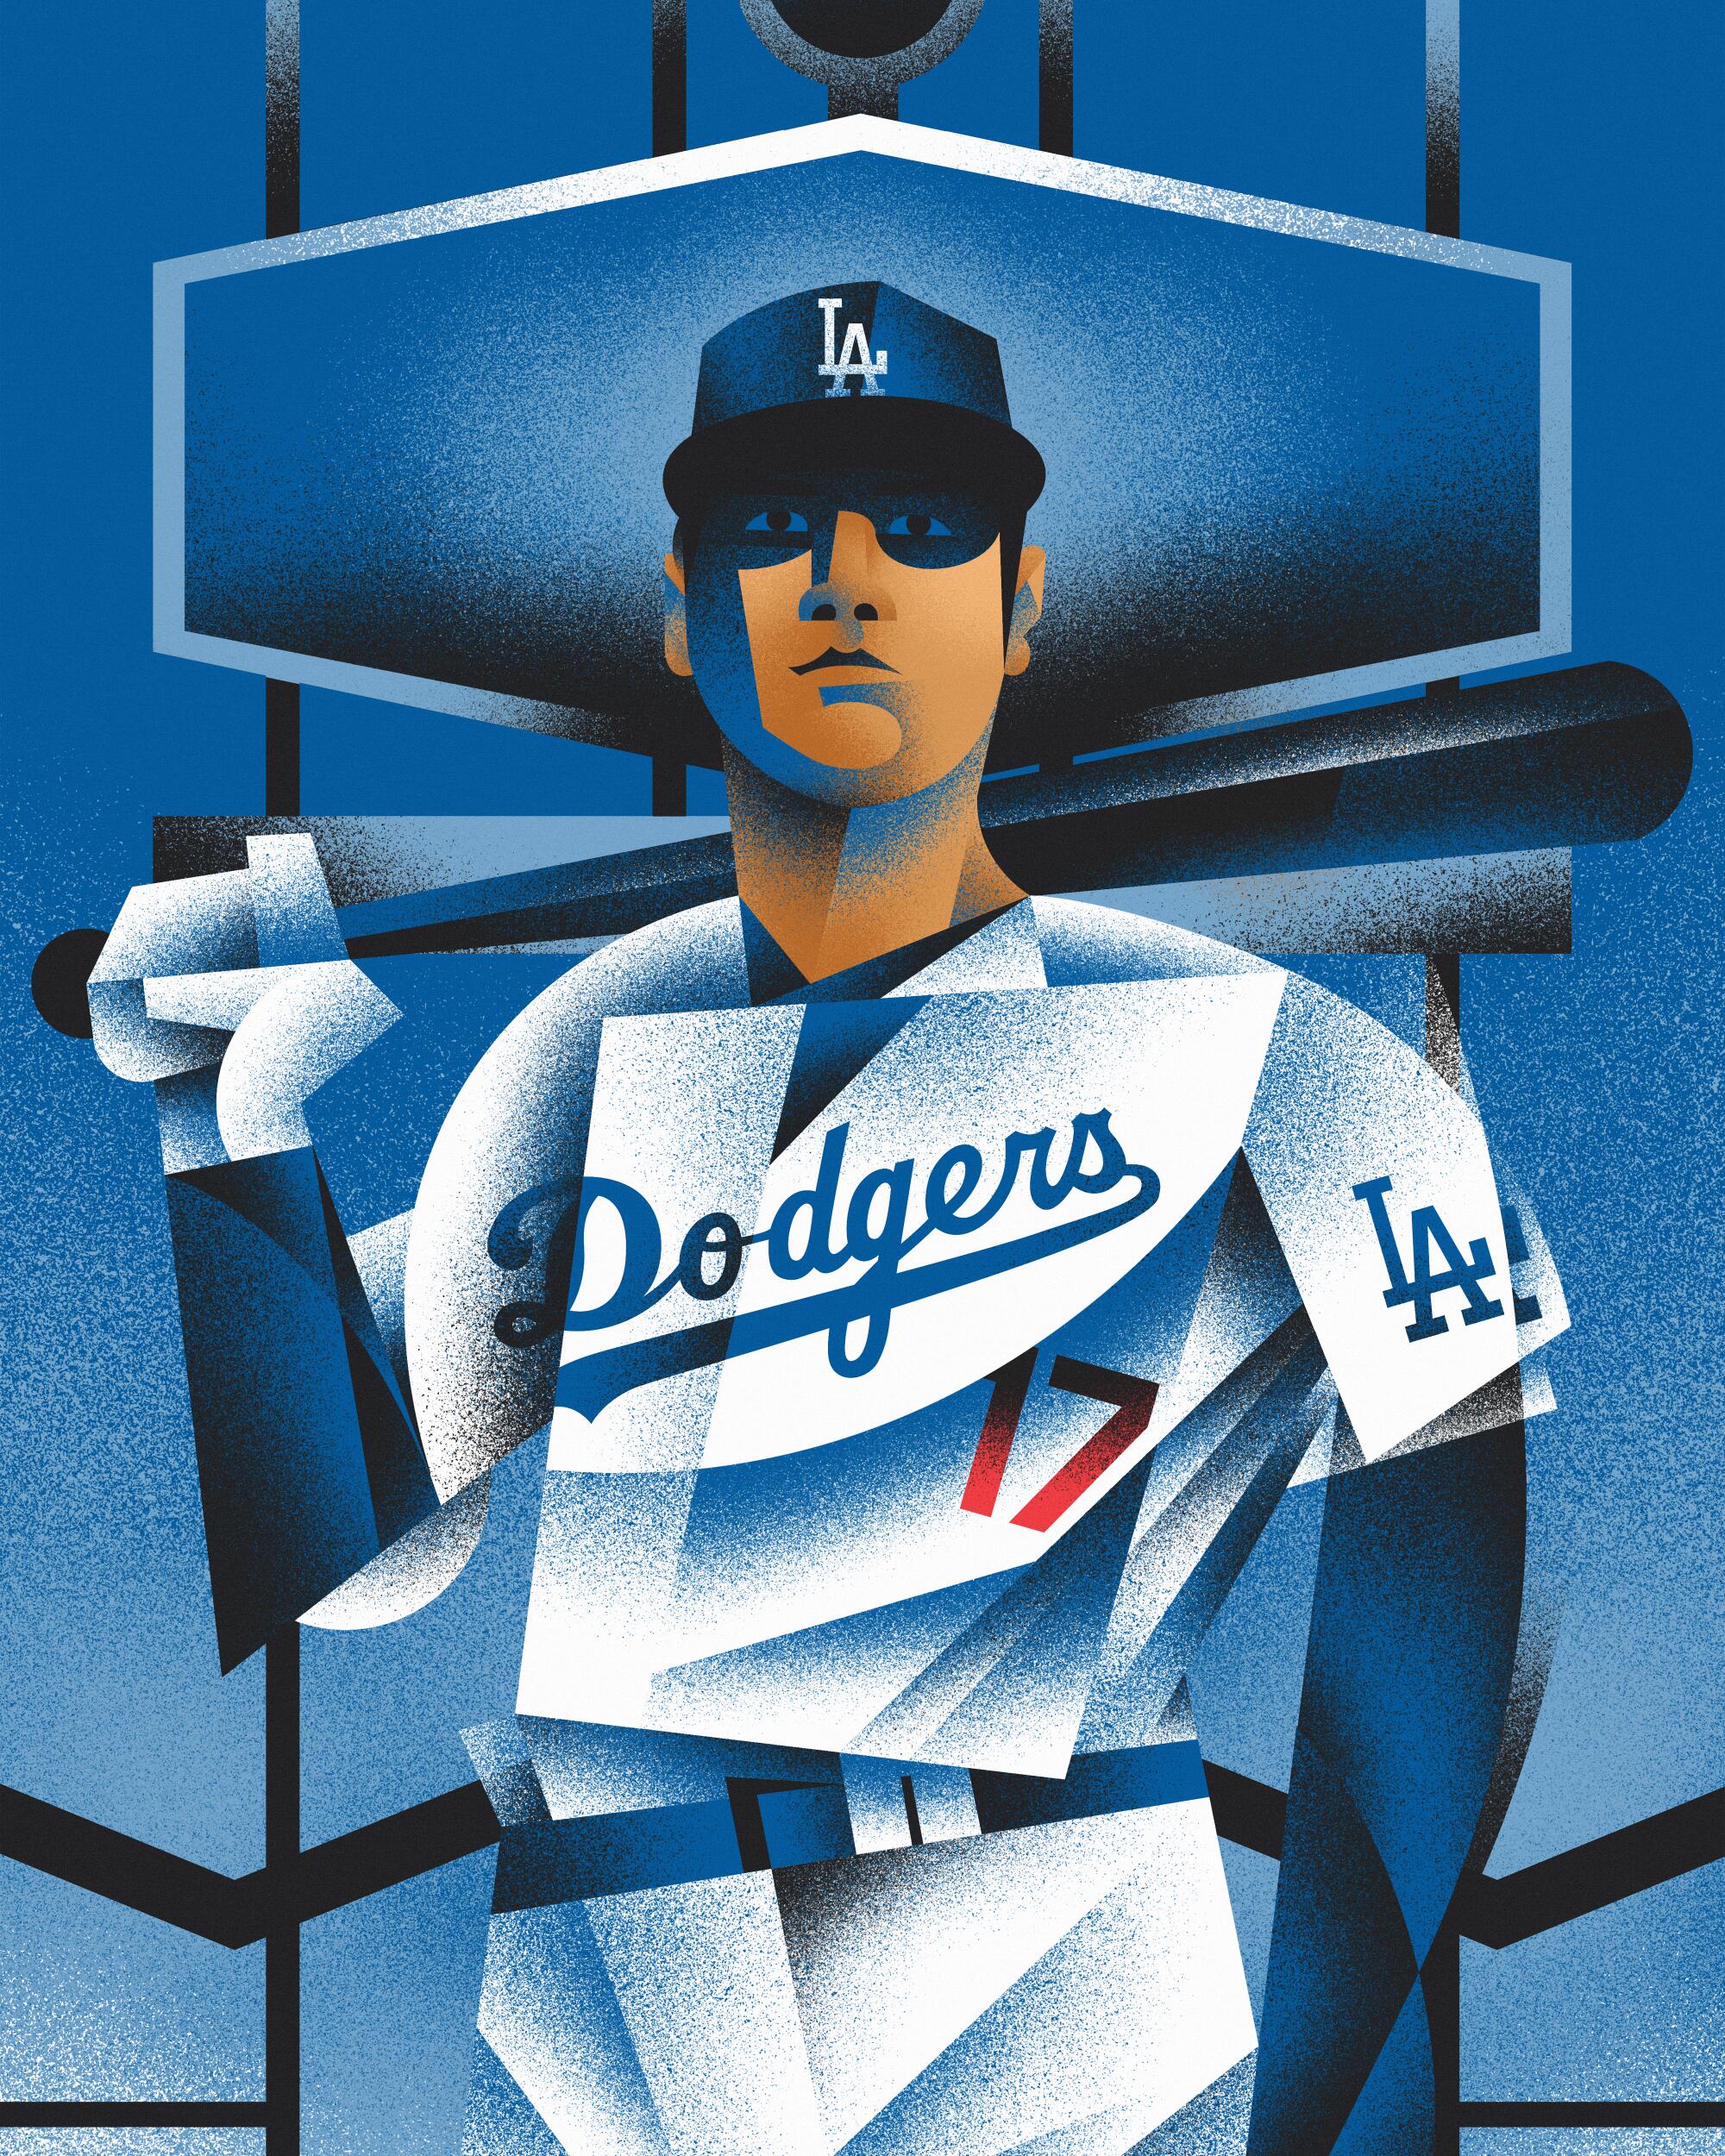 Illustration in cubist style of Shohei Ohtani wearing a Dodgers uniform holding a bat across his shoulders